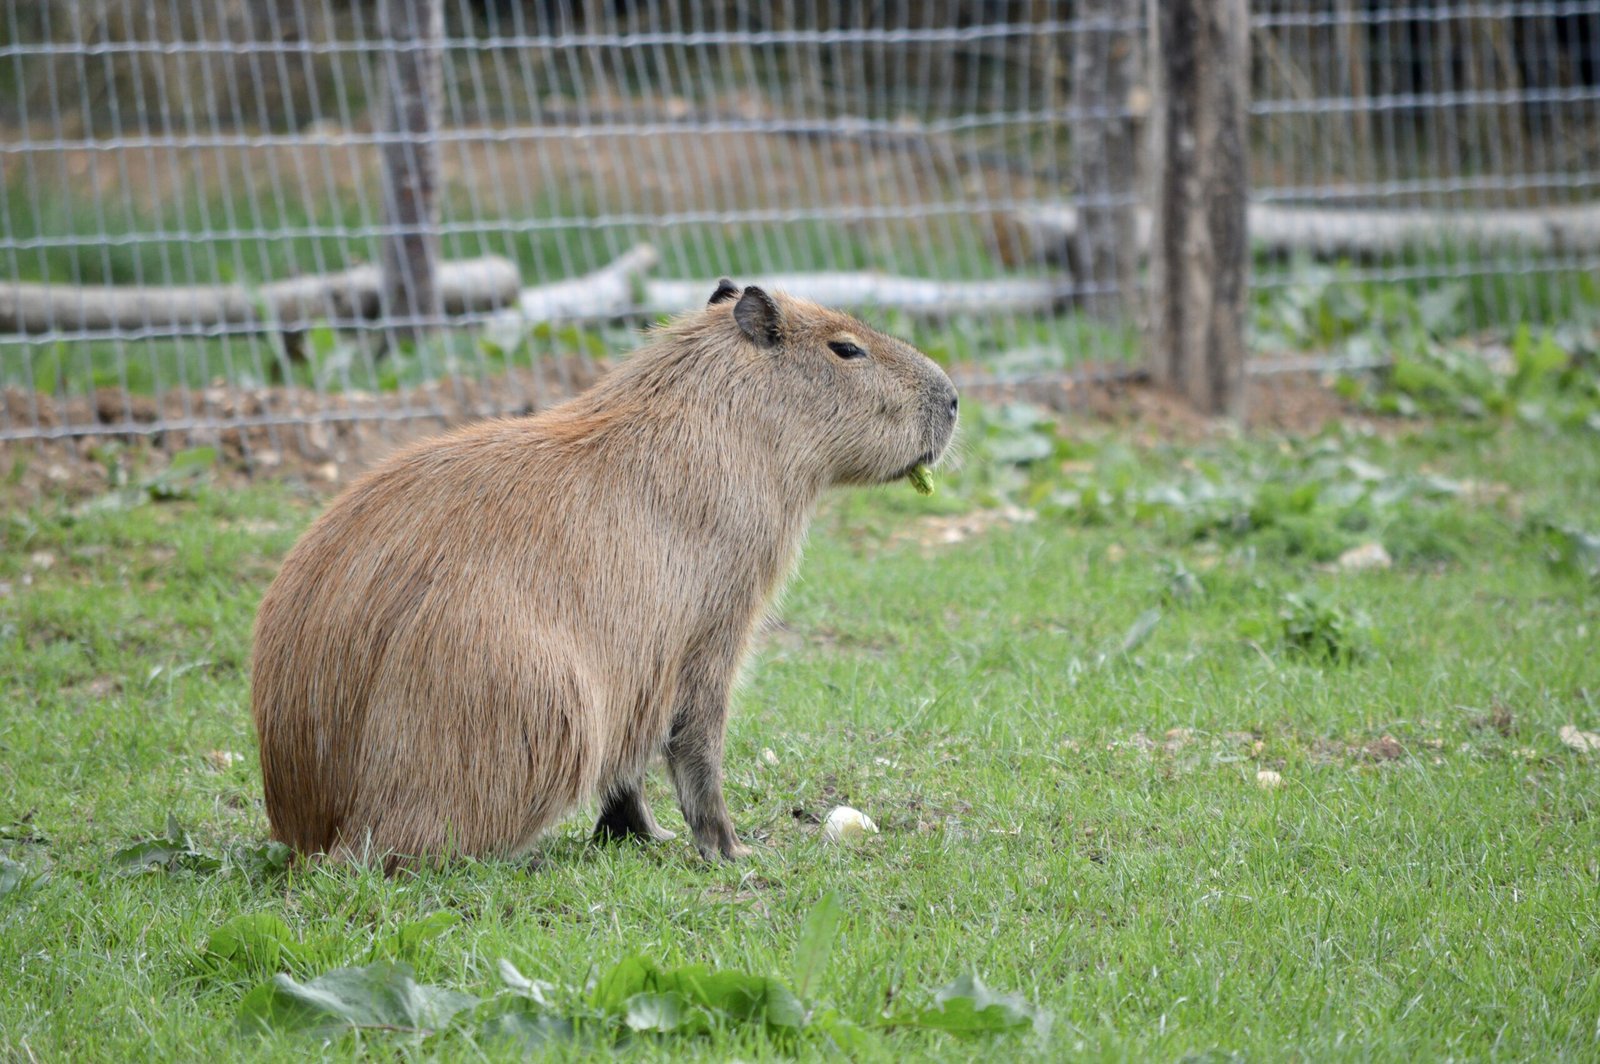 Is it legal to own a capybara in Missouri?